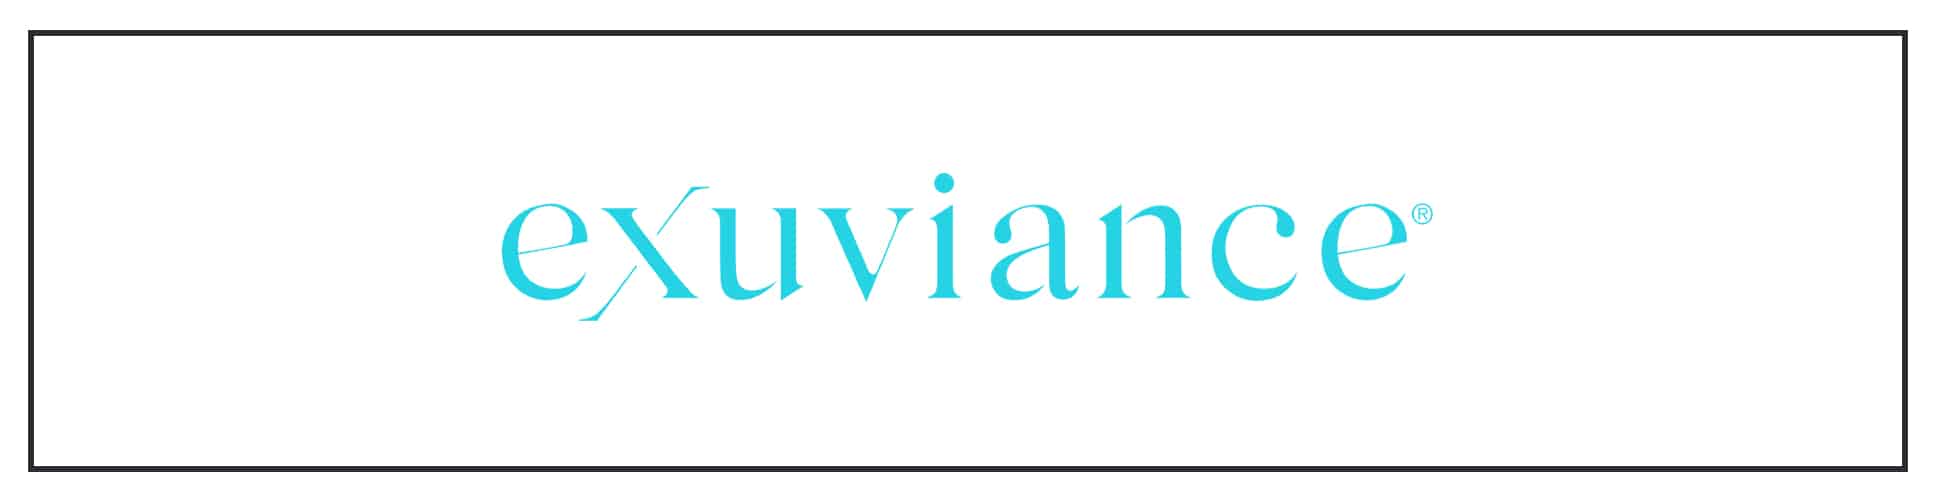 The logo for exuvance on a white background.